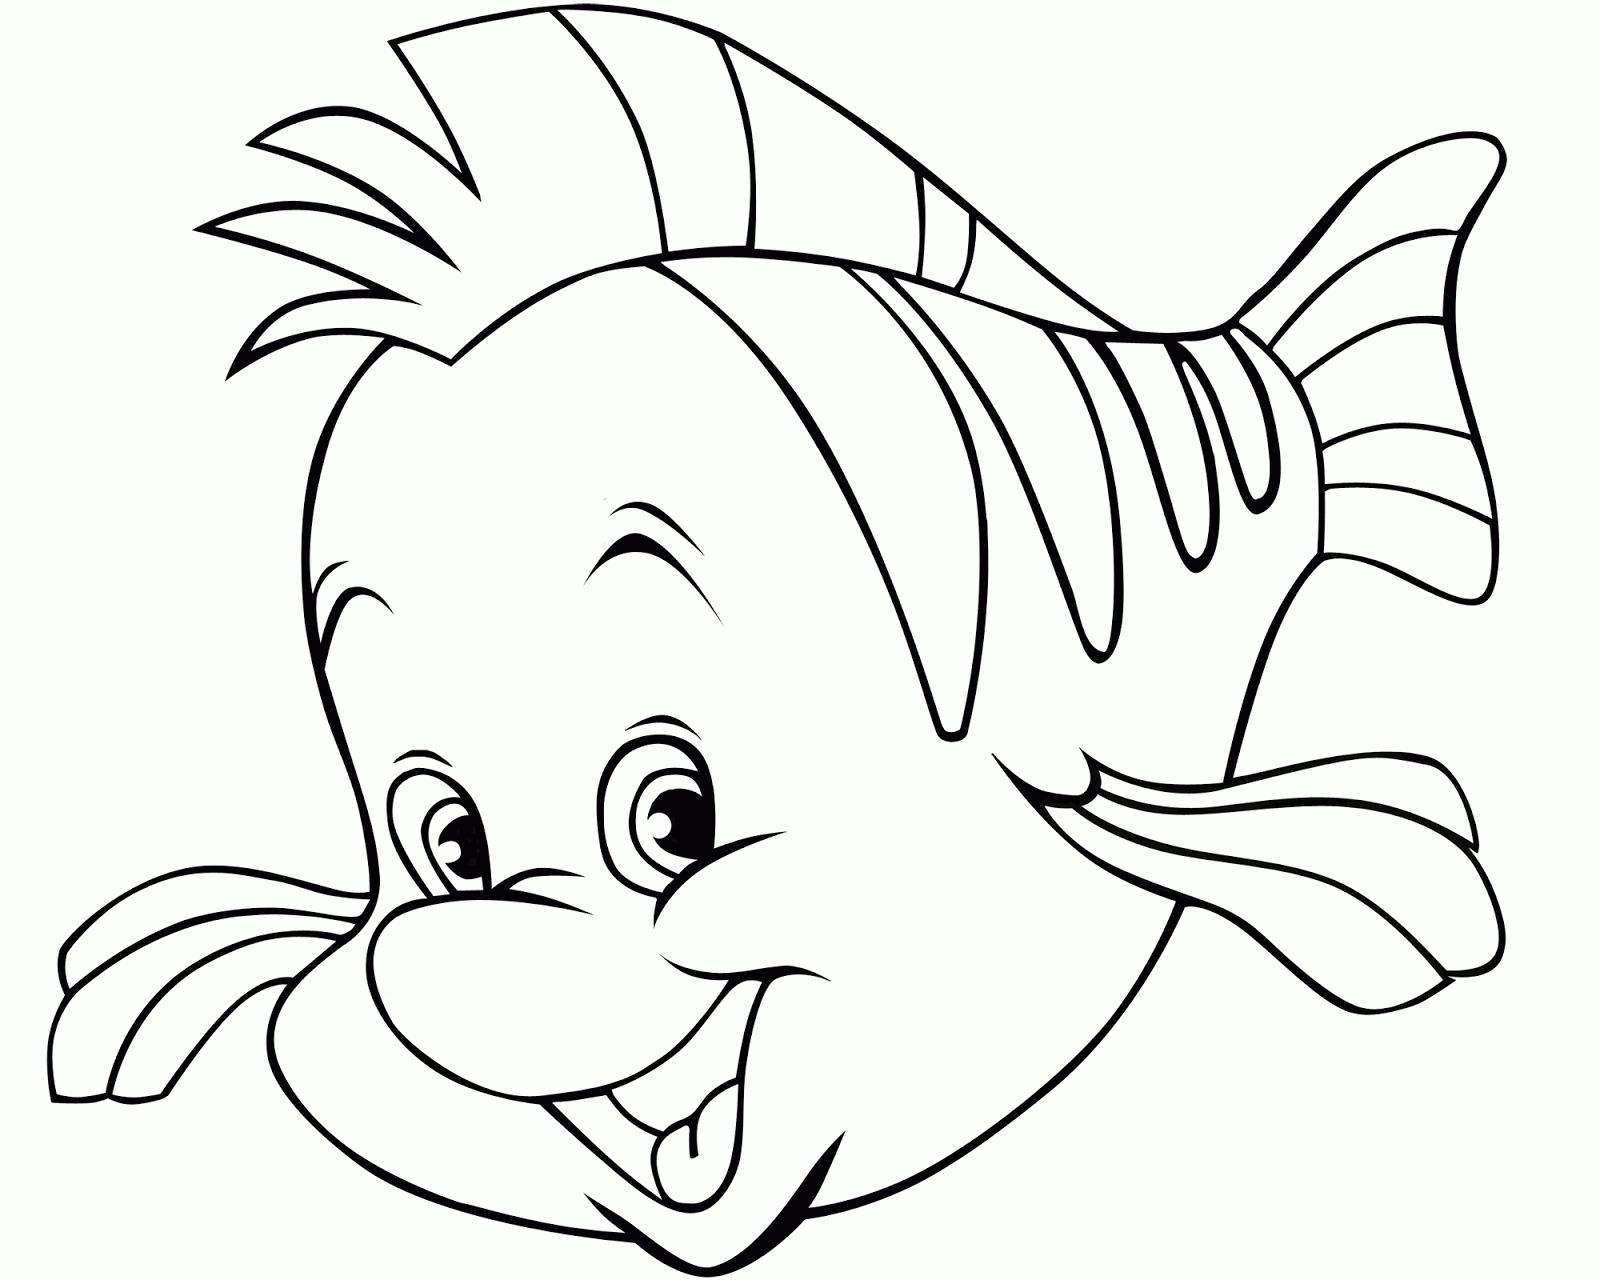 printable cartoon fish coloring page for kids. fish coloring pages ...